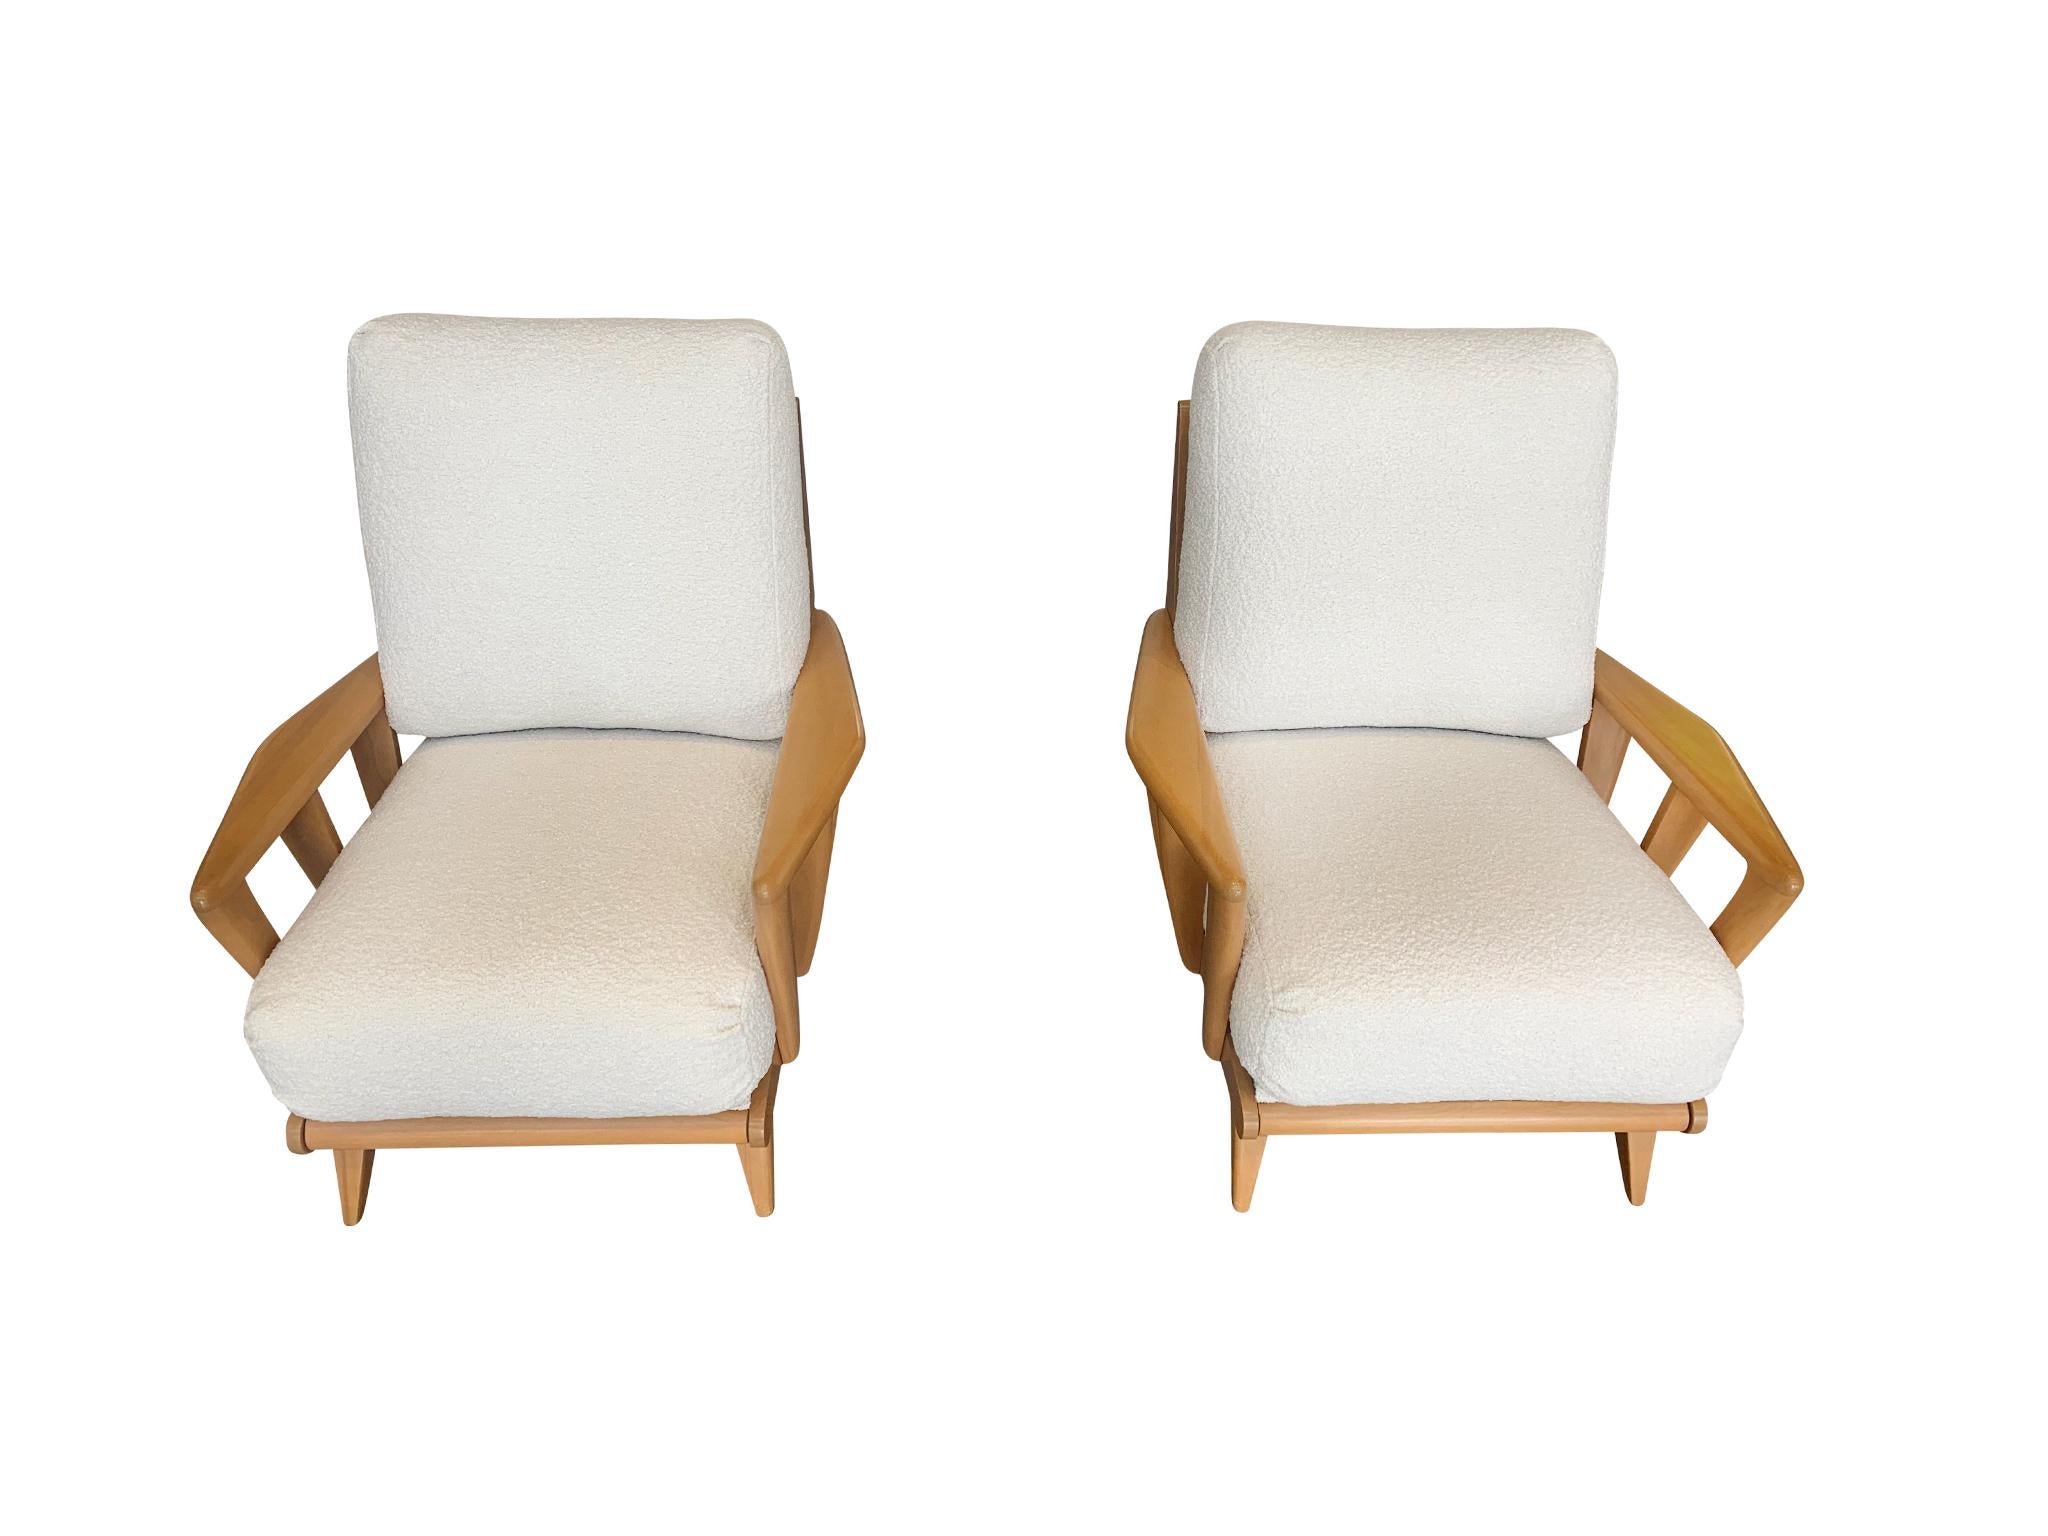 These Heywood-Wakefield lounge chairs consist of rock maple frames and new cushions with ivory-toned bouclé upholstery from Schumacher. The chairs were originally crafted in the Mid-20th Century, part of Heywood-Wakefield's Biscayne